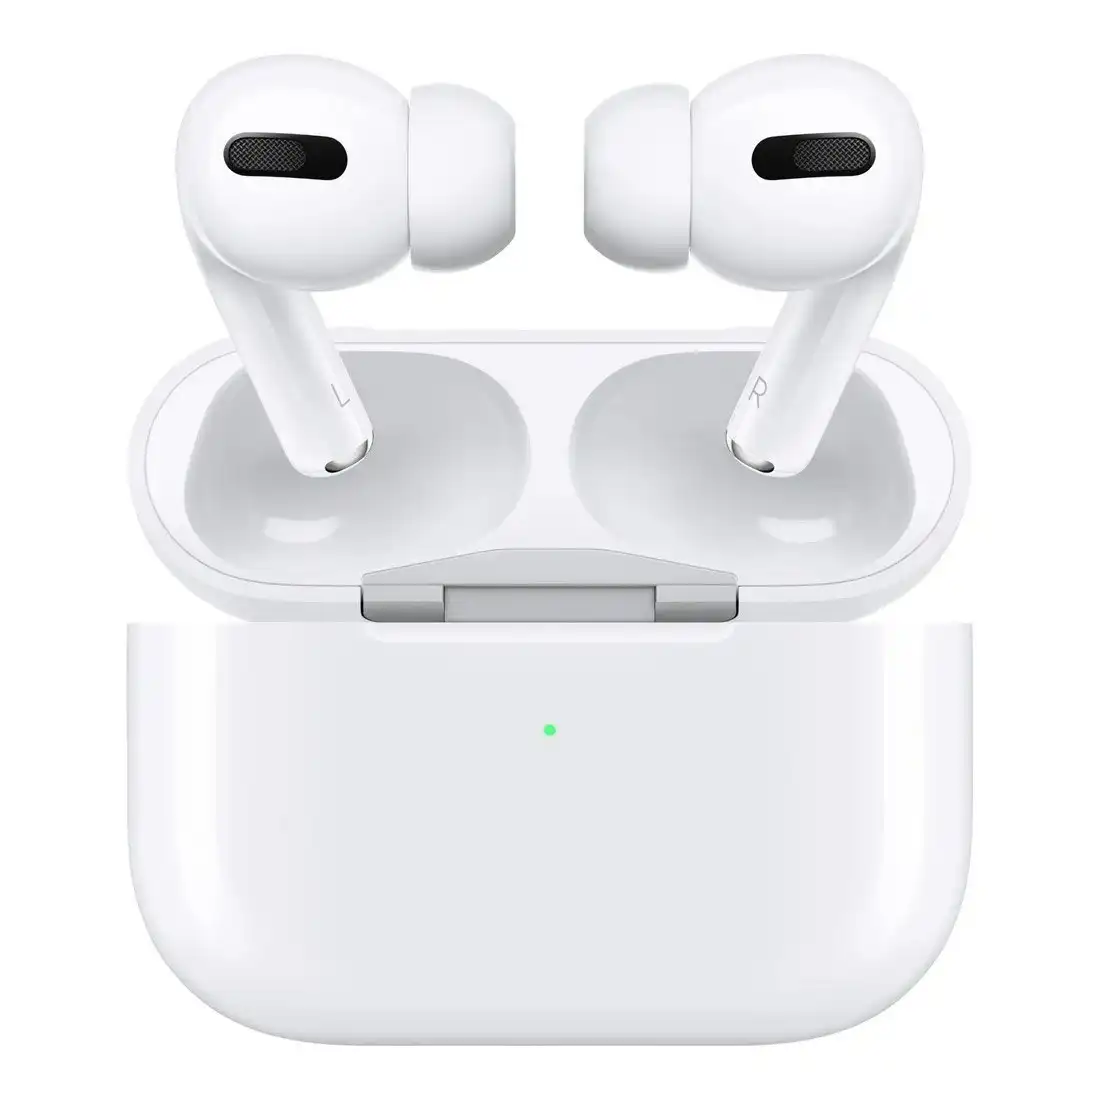 [Refur] Apple AirPods Pro with MagSafe Charging Case MLWK3ZA/A [Refurbished] - Excellent